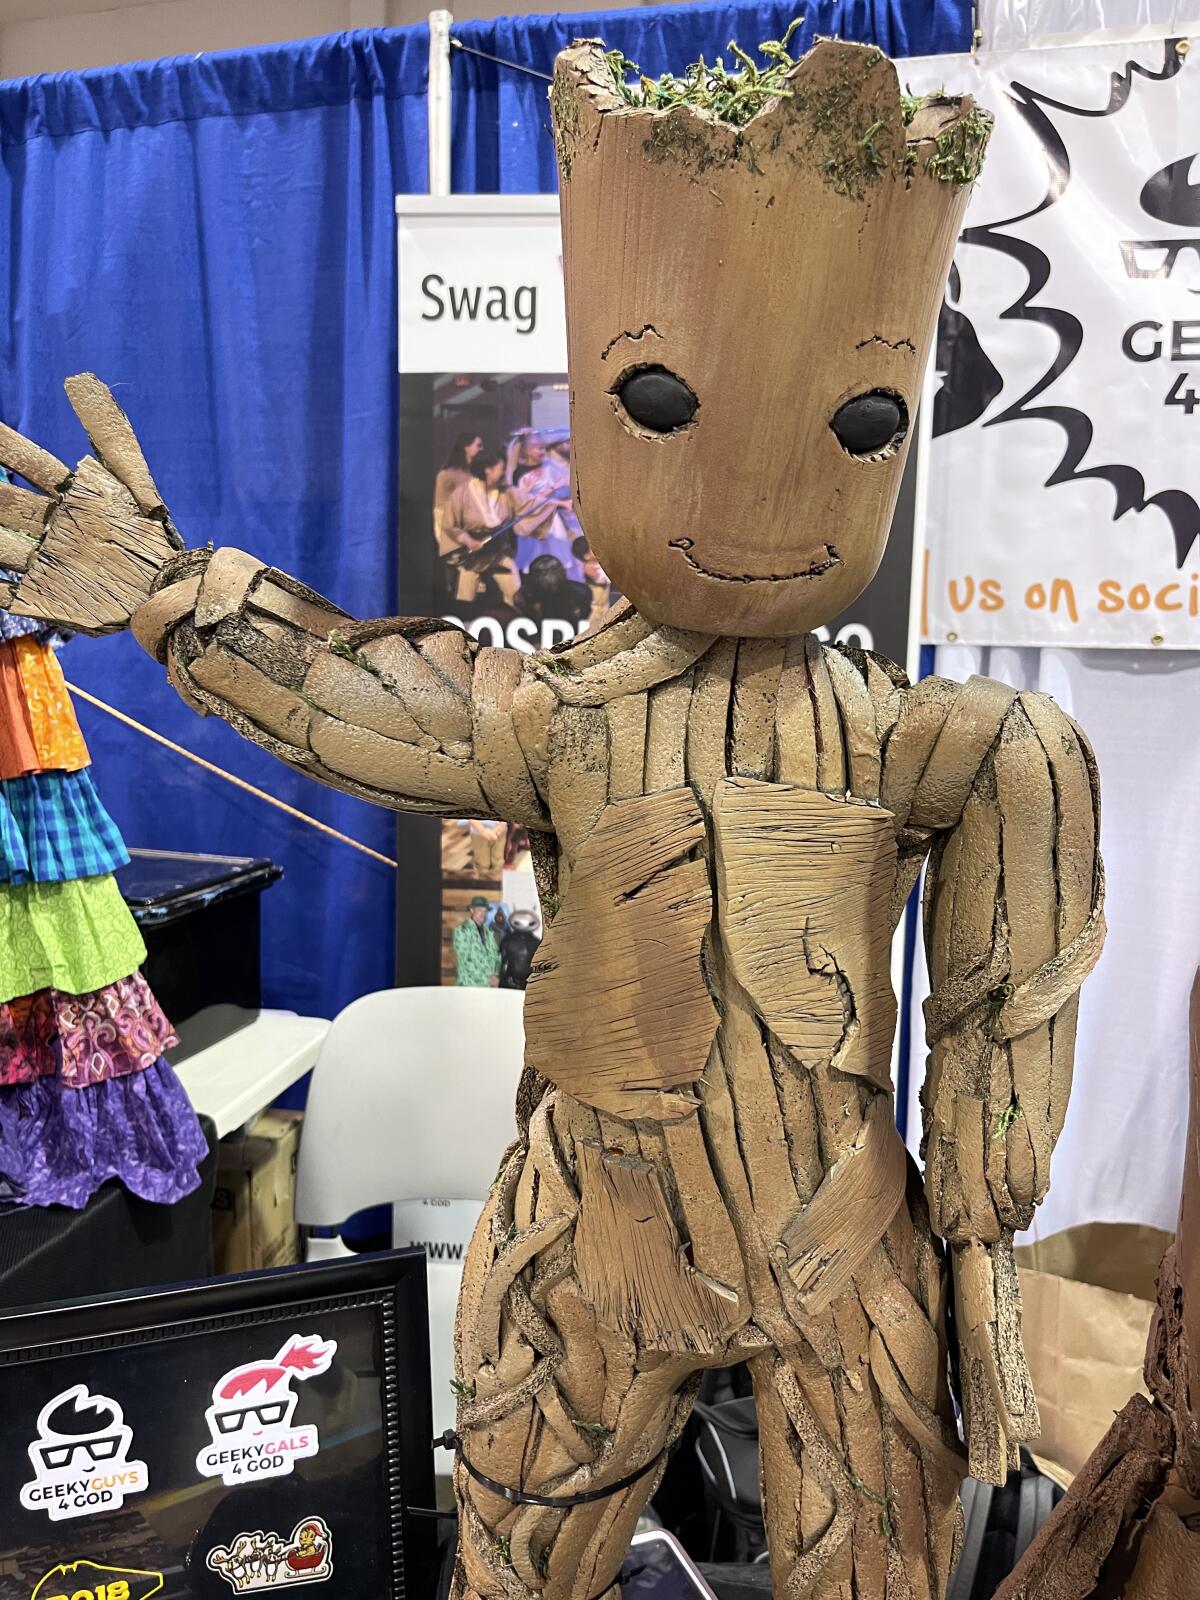 A model of the Marvel character Groot.